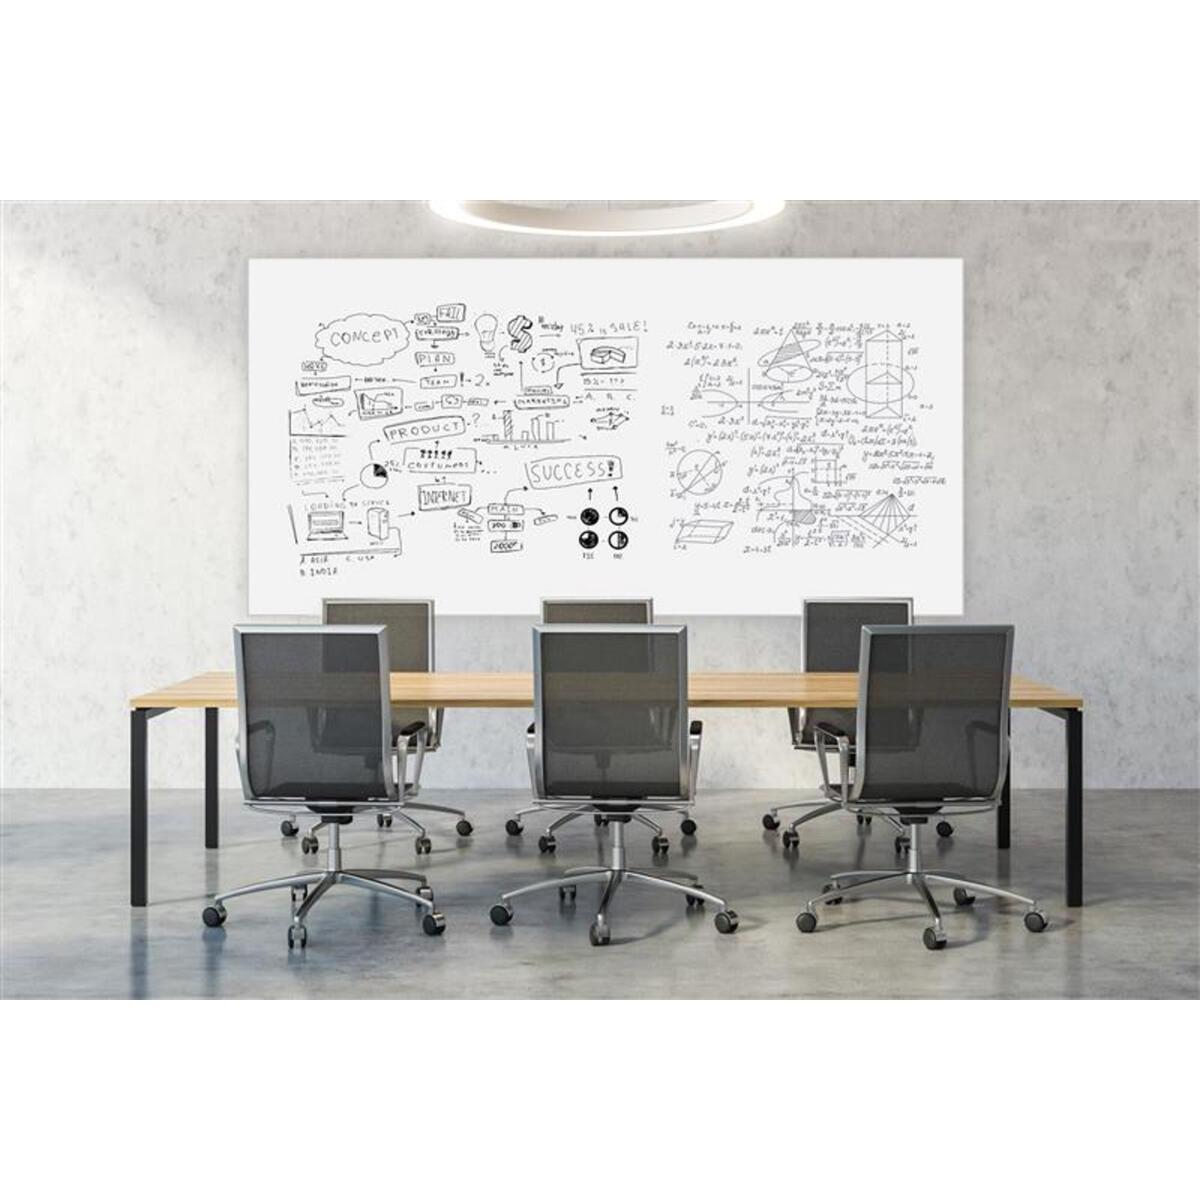 96"W x 48"H Magnetic Wall-Mounted Glass Board